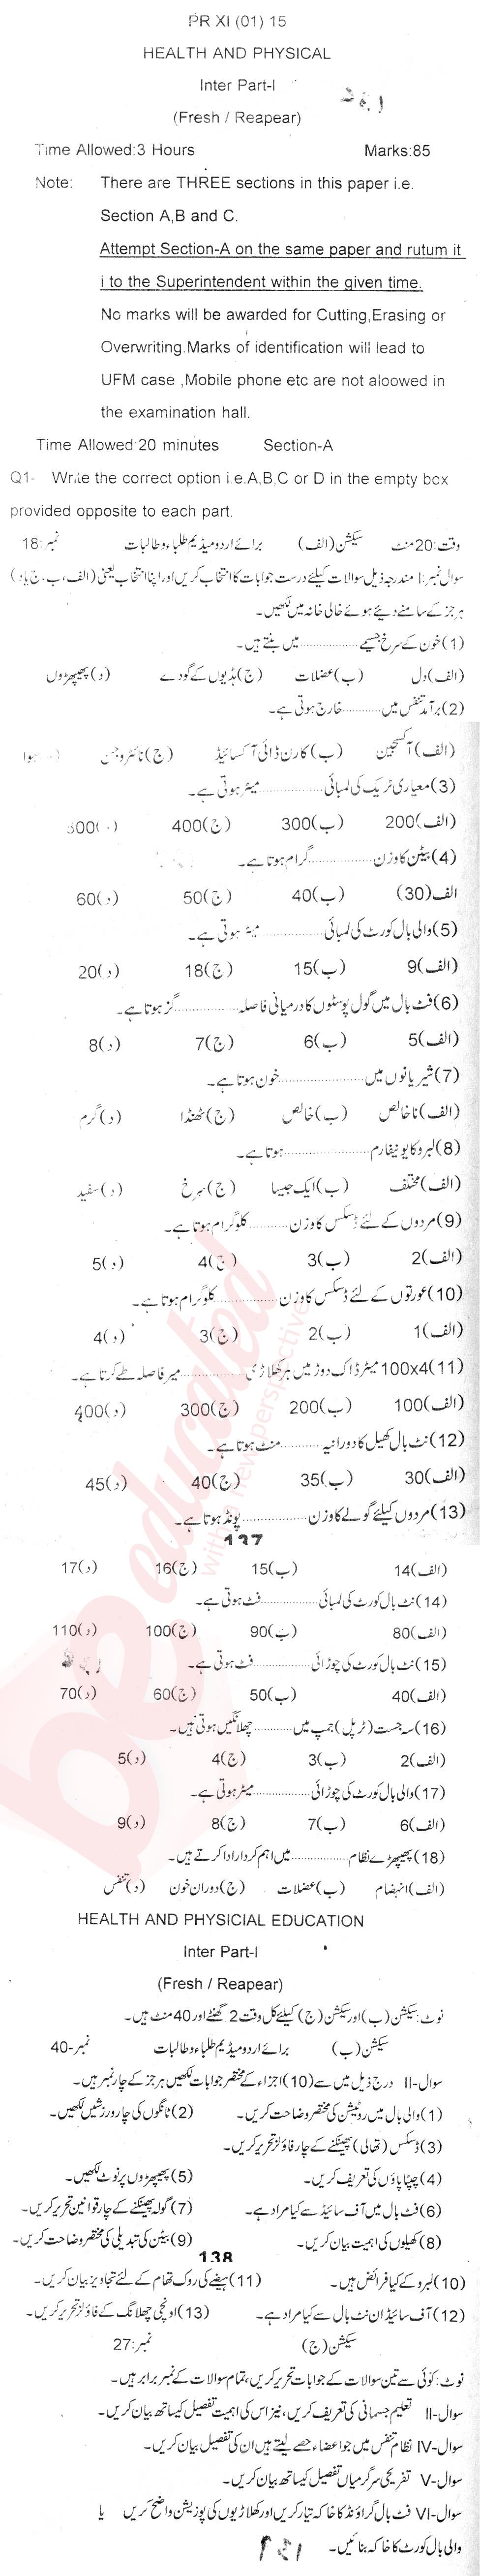 Health and Physical Education FA Part 1 Past Paper Group 1 BISE Swat 2015